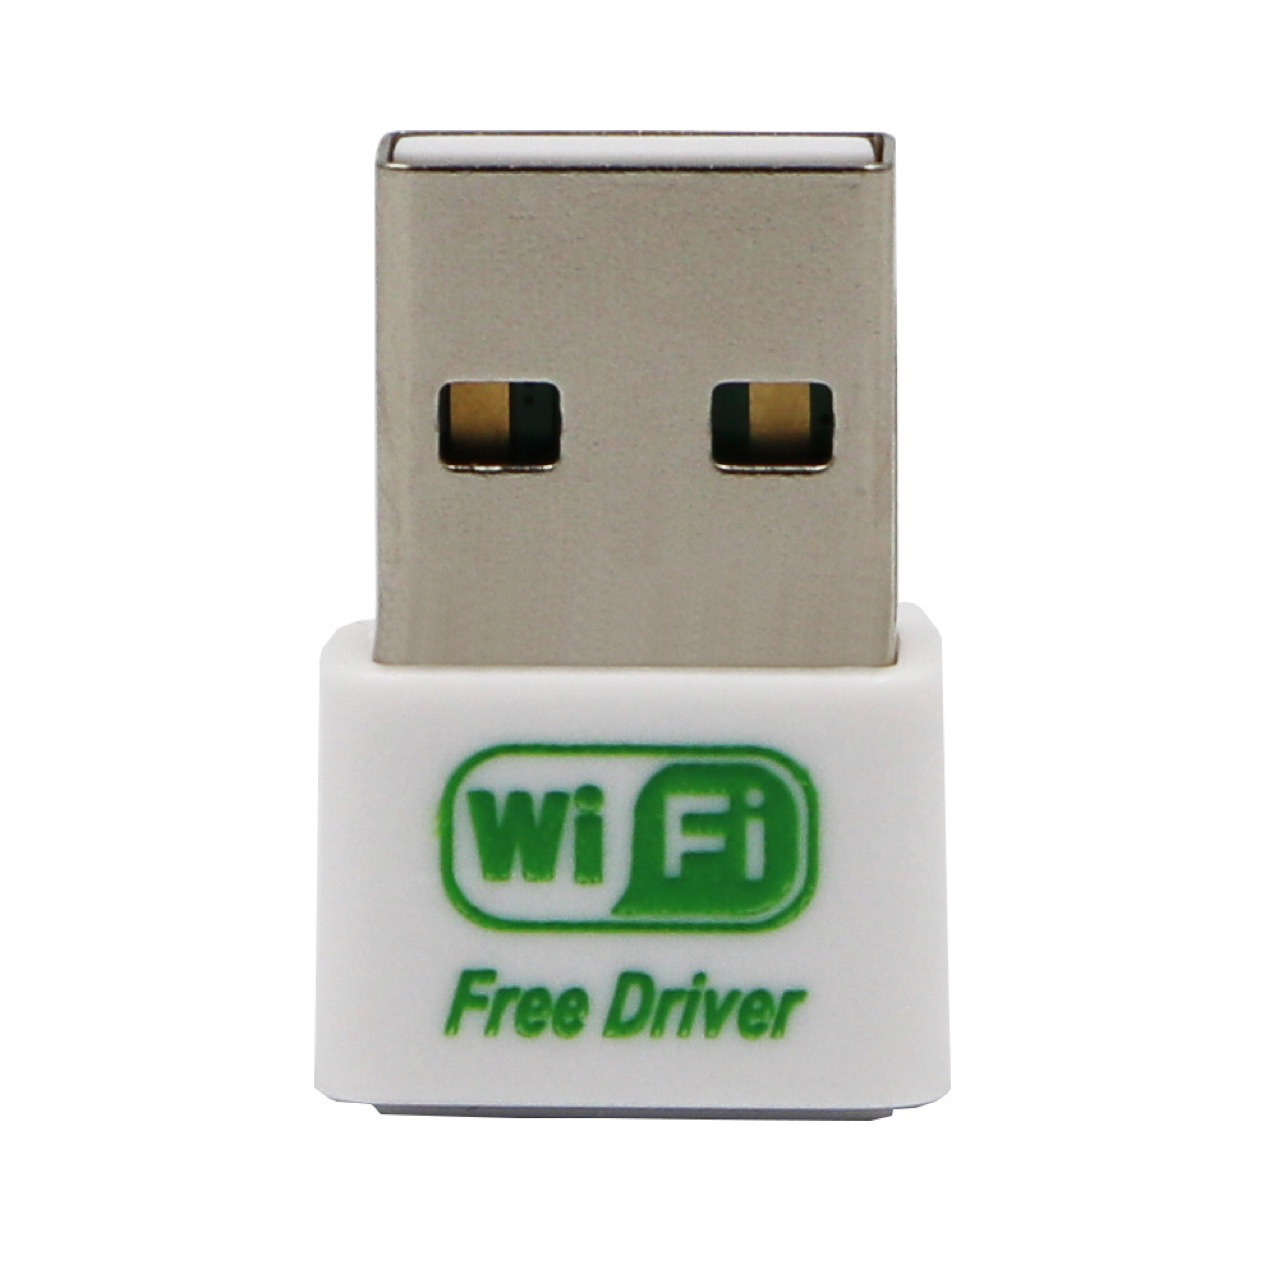 Encore 802.11g wireless usb adapter driver for mac